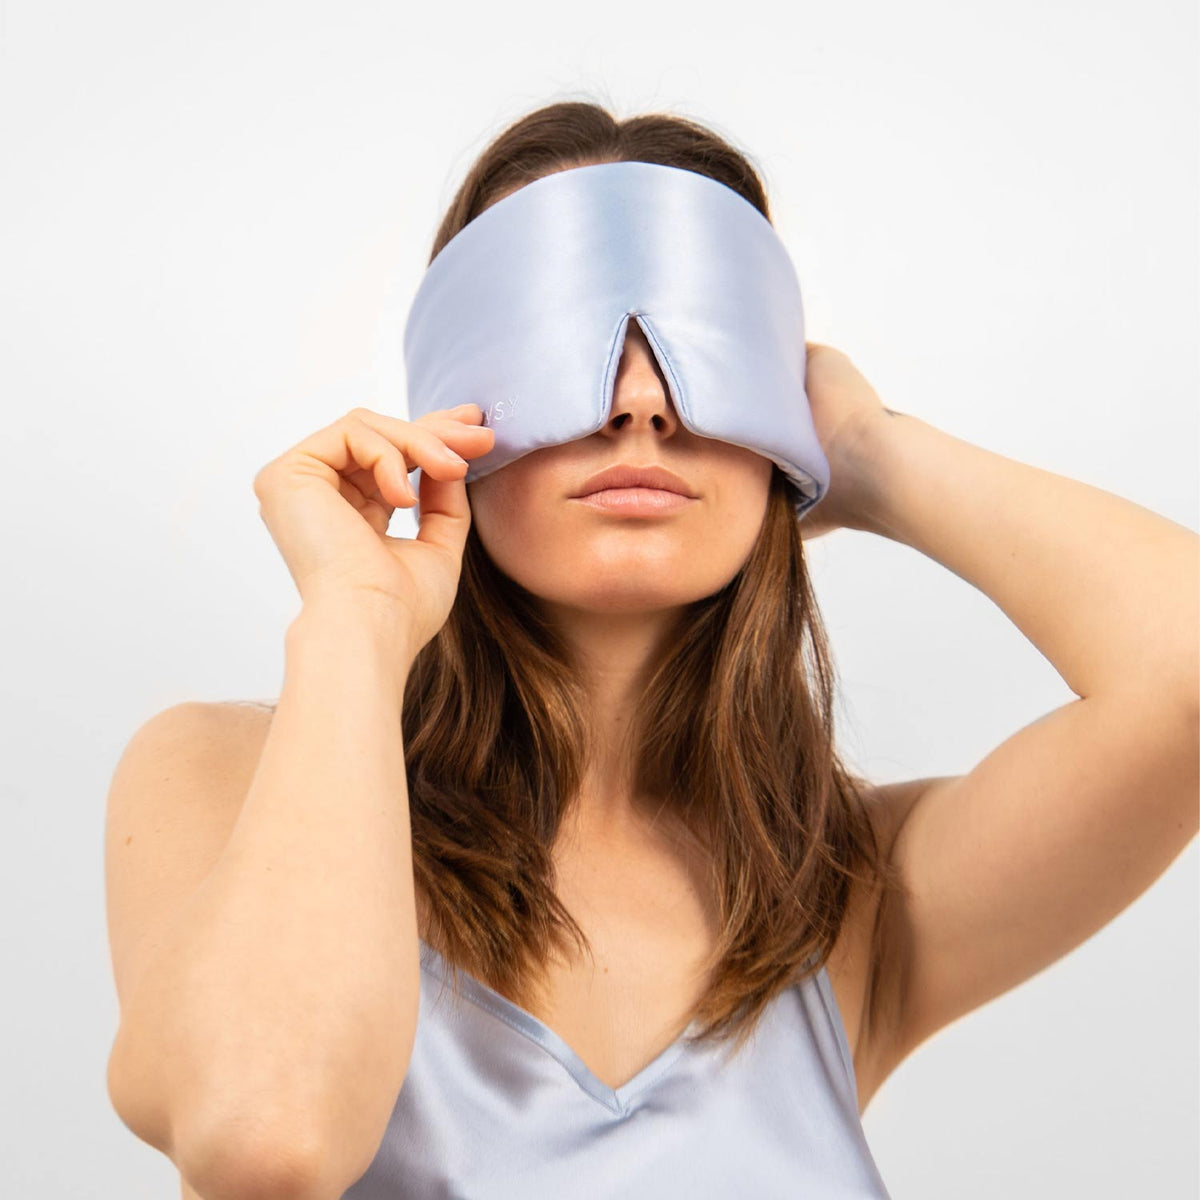 Model with Drowsy Silk sleep mask covering eyes